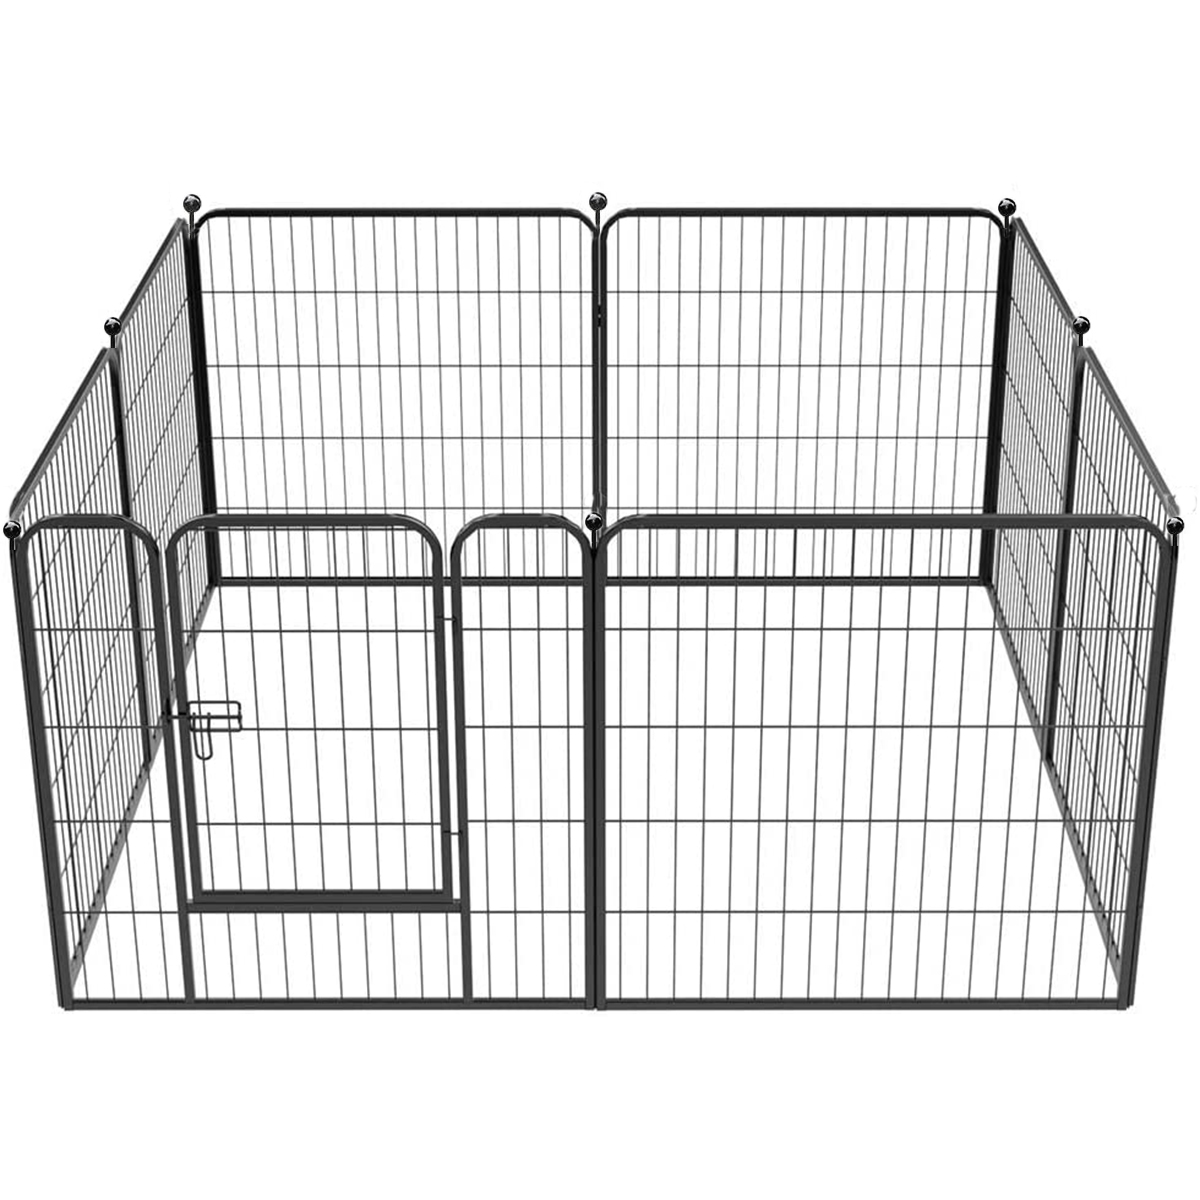 PawGiant-Dog-Pen-8-Panels-40quot-Height-RV-Dog-Fence-Outdoor-Playpens-Exercise-Pen-for-Dogs-Metal-Pr-1828107-12